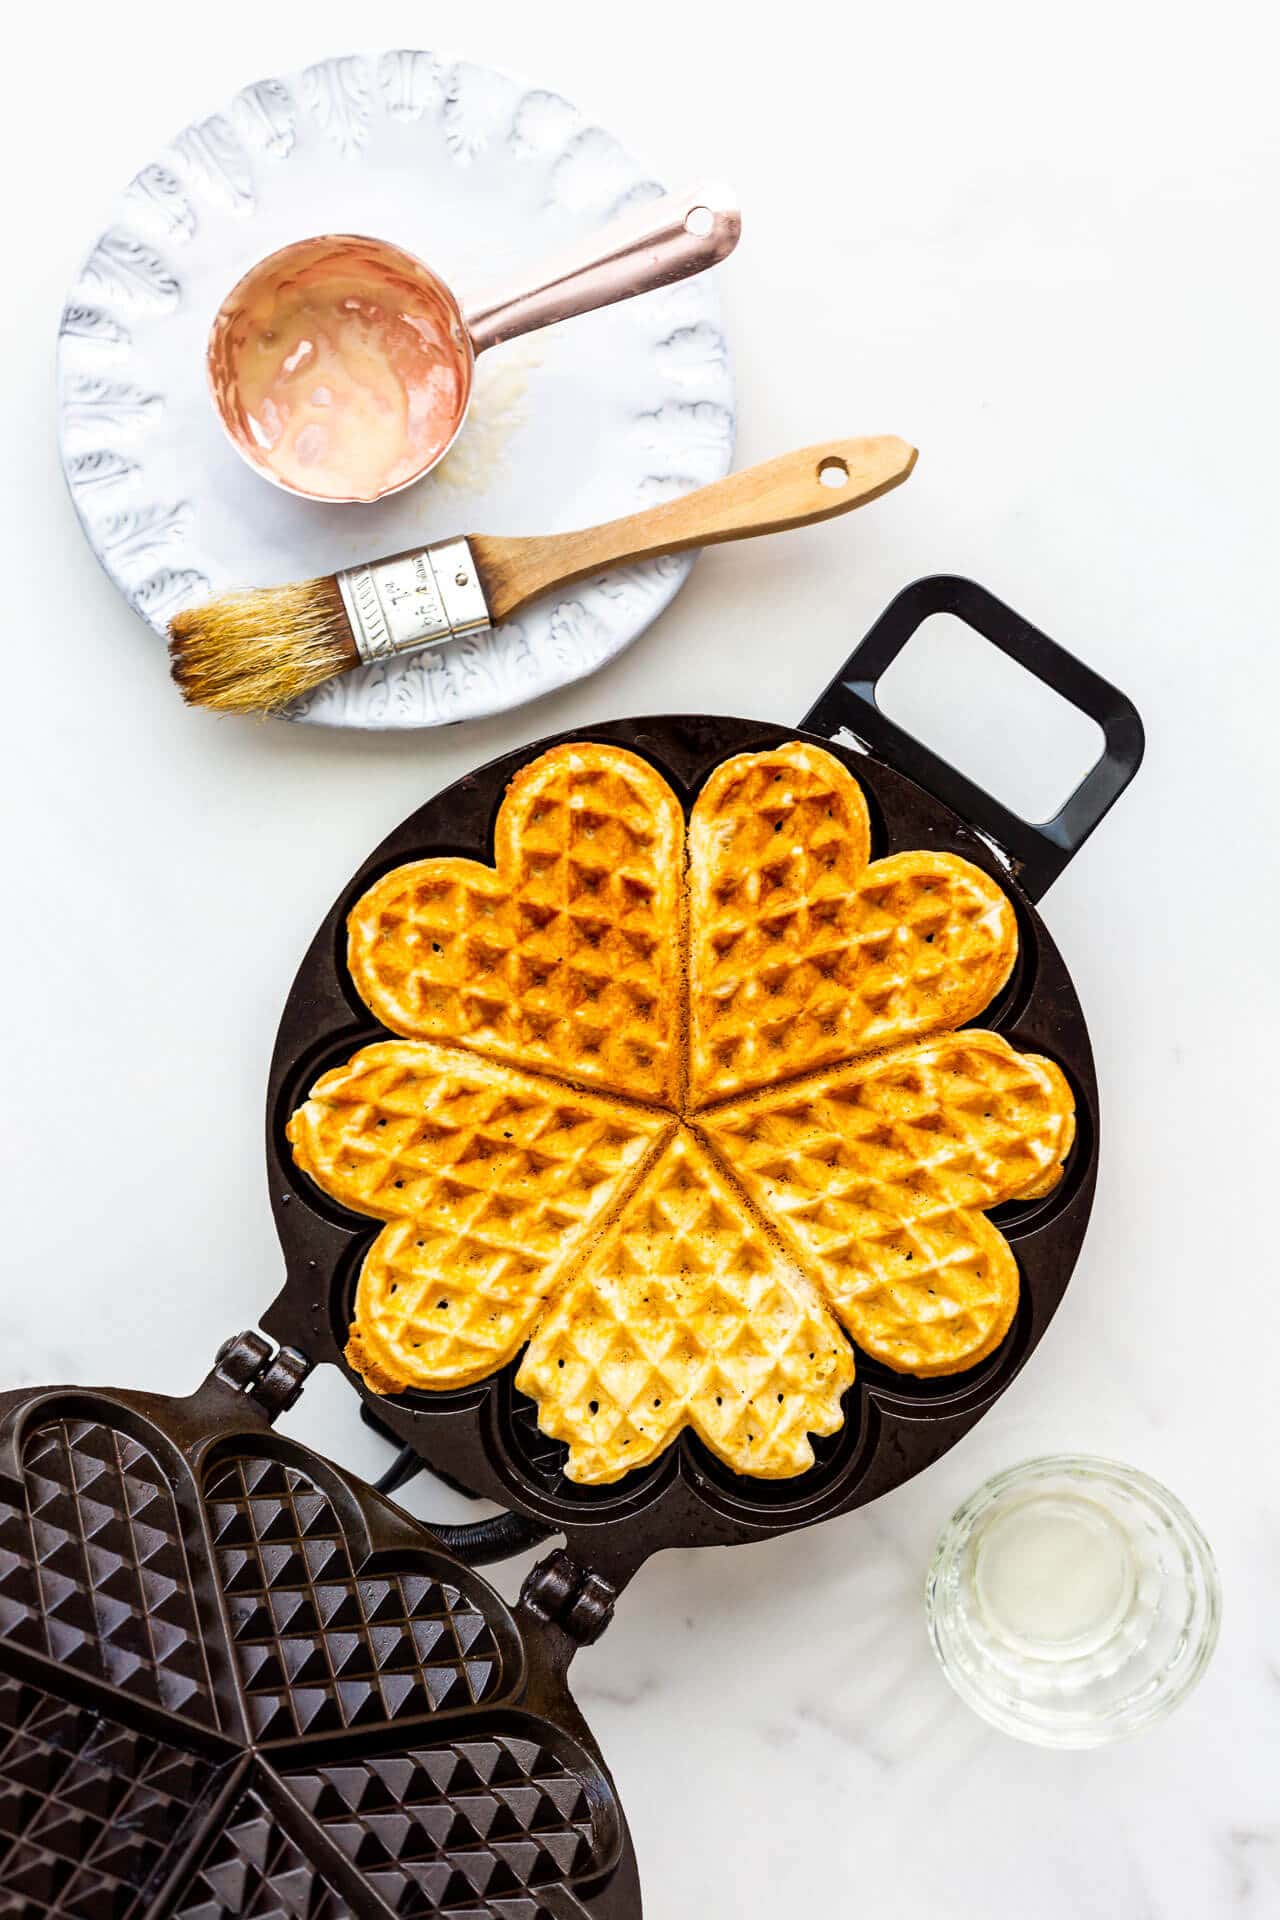 Plain waffle being cooked in a waffle maker.